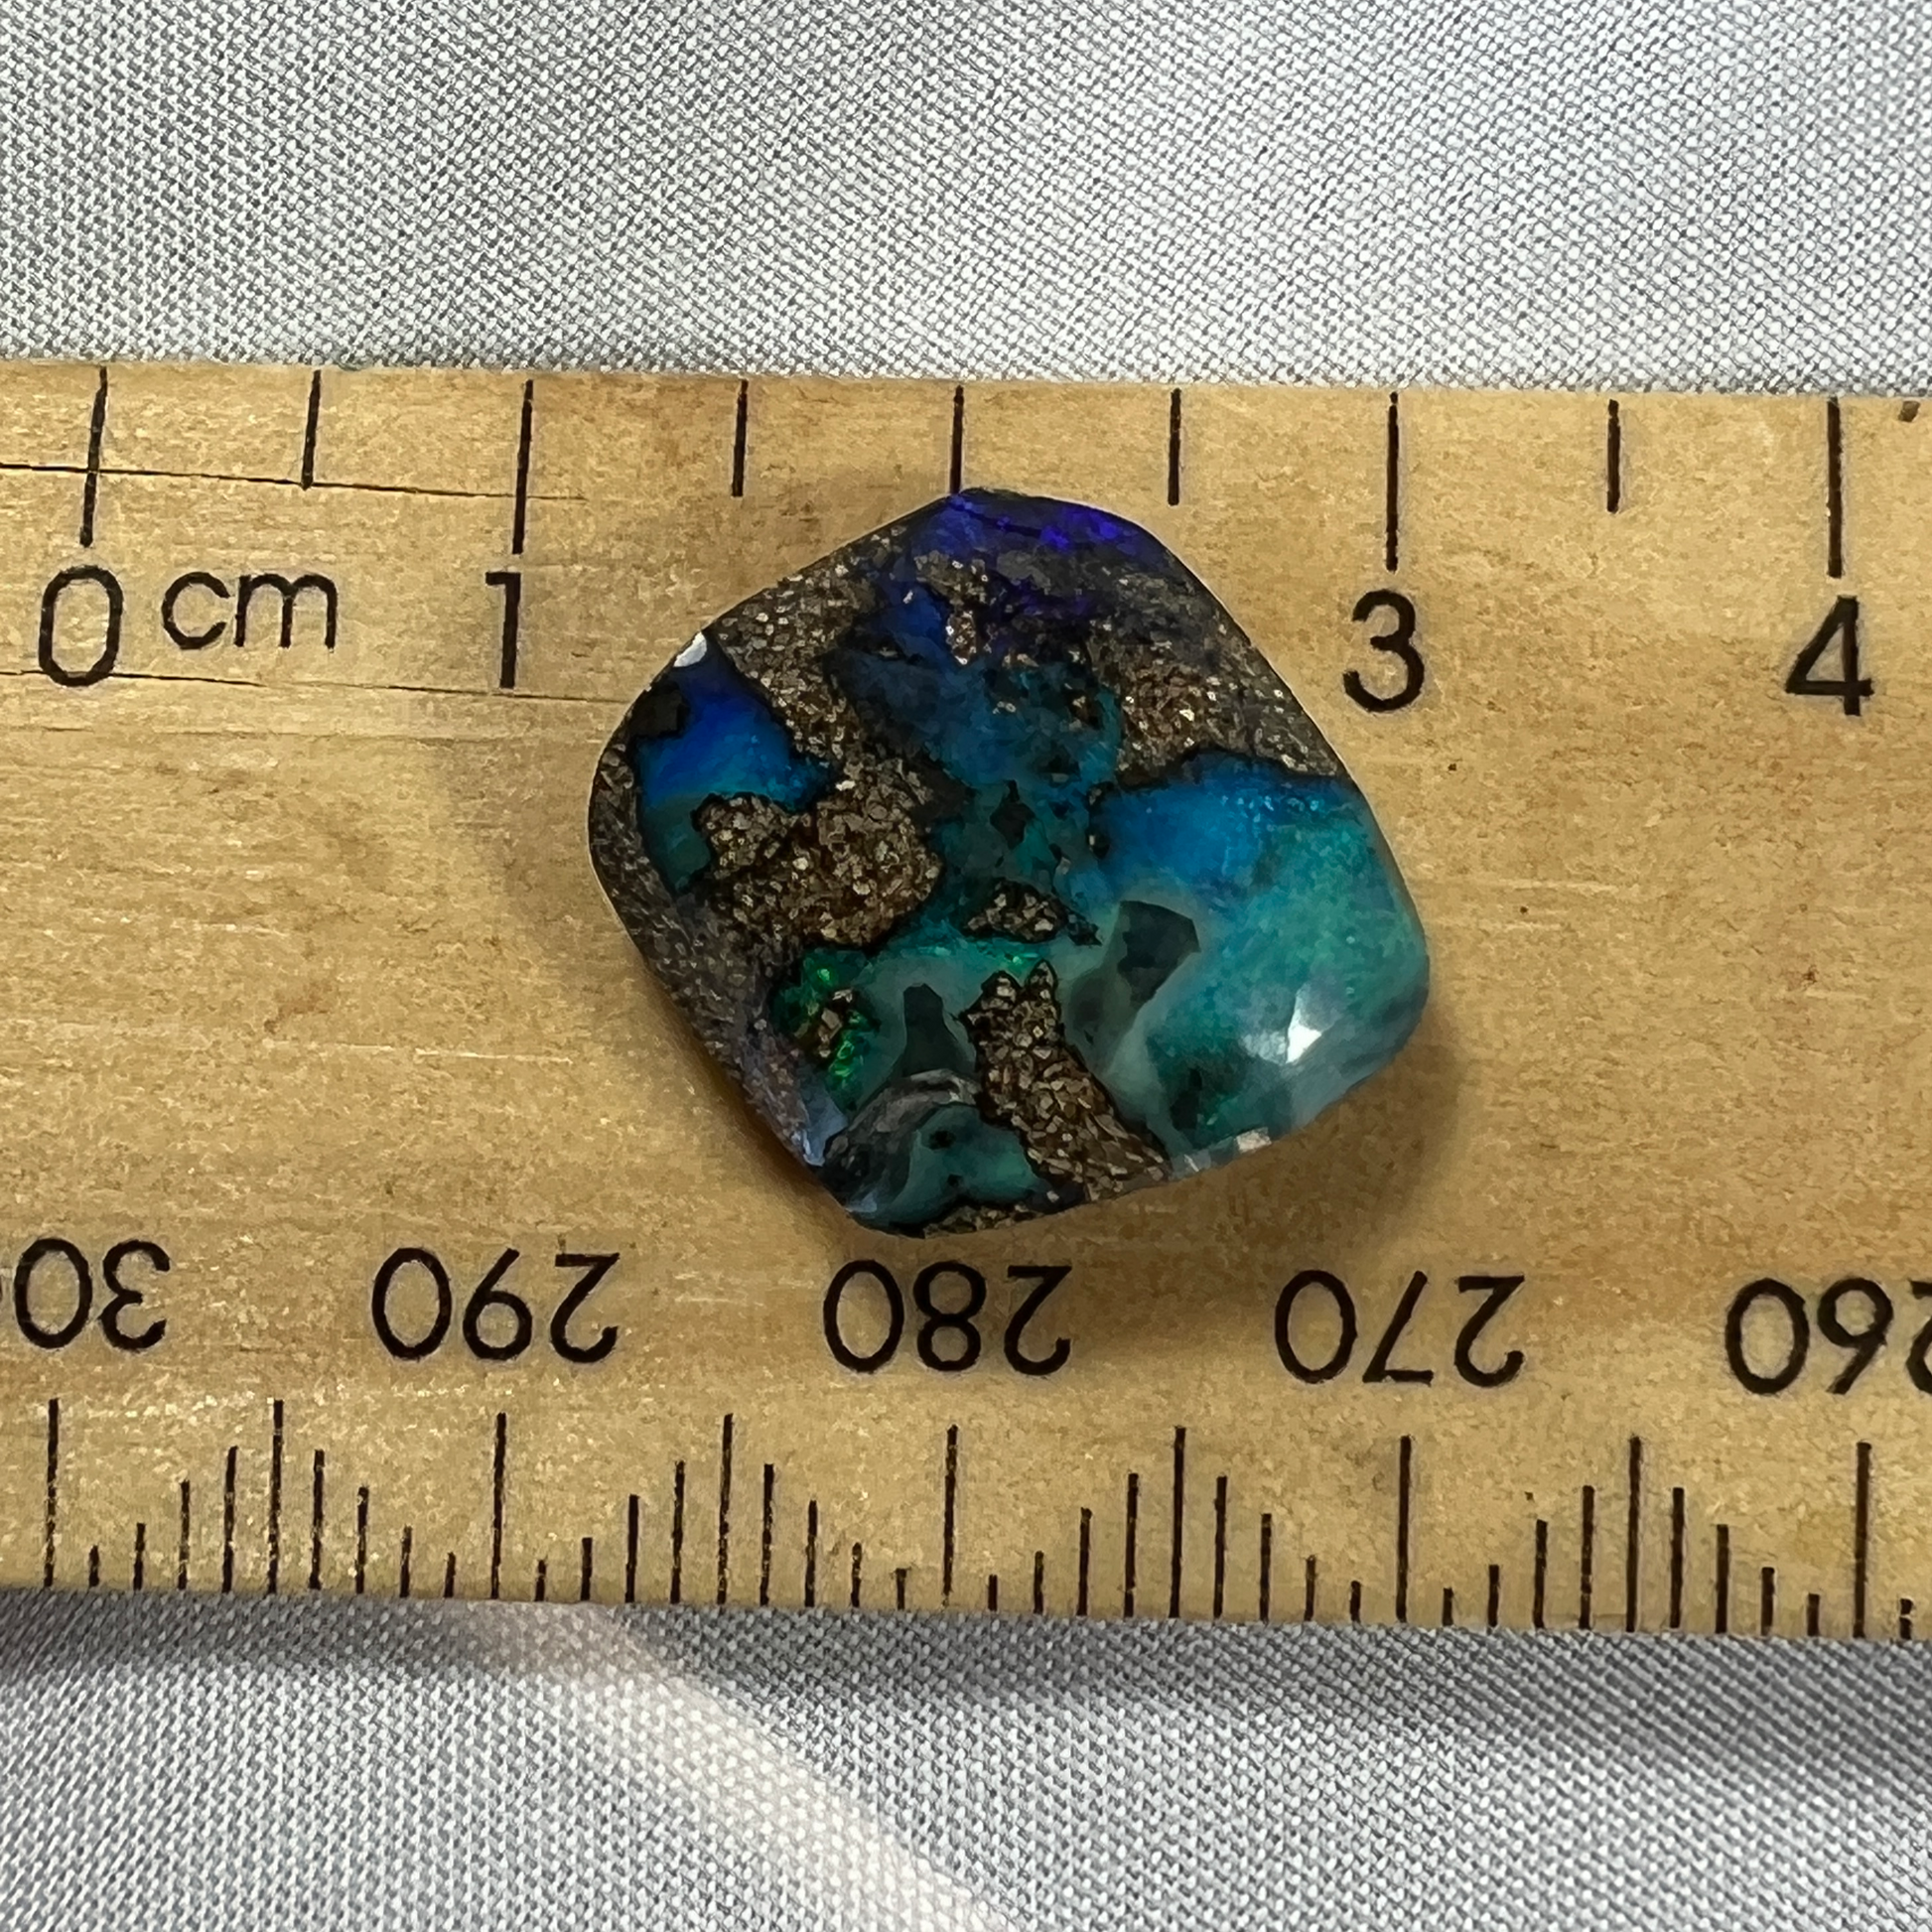 Beautiful greens and blues are displayed in this nice piece of Queensland boulder opal.